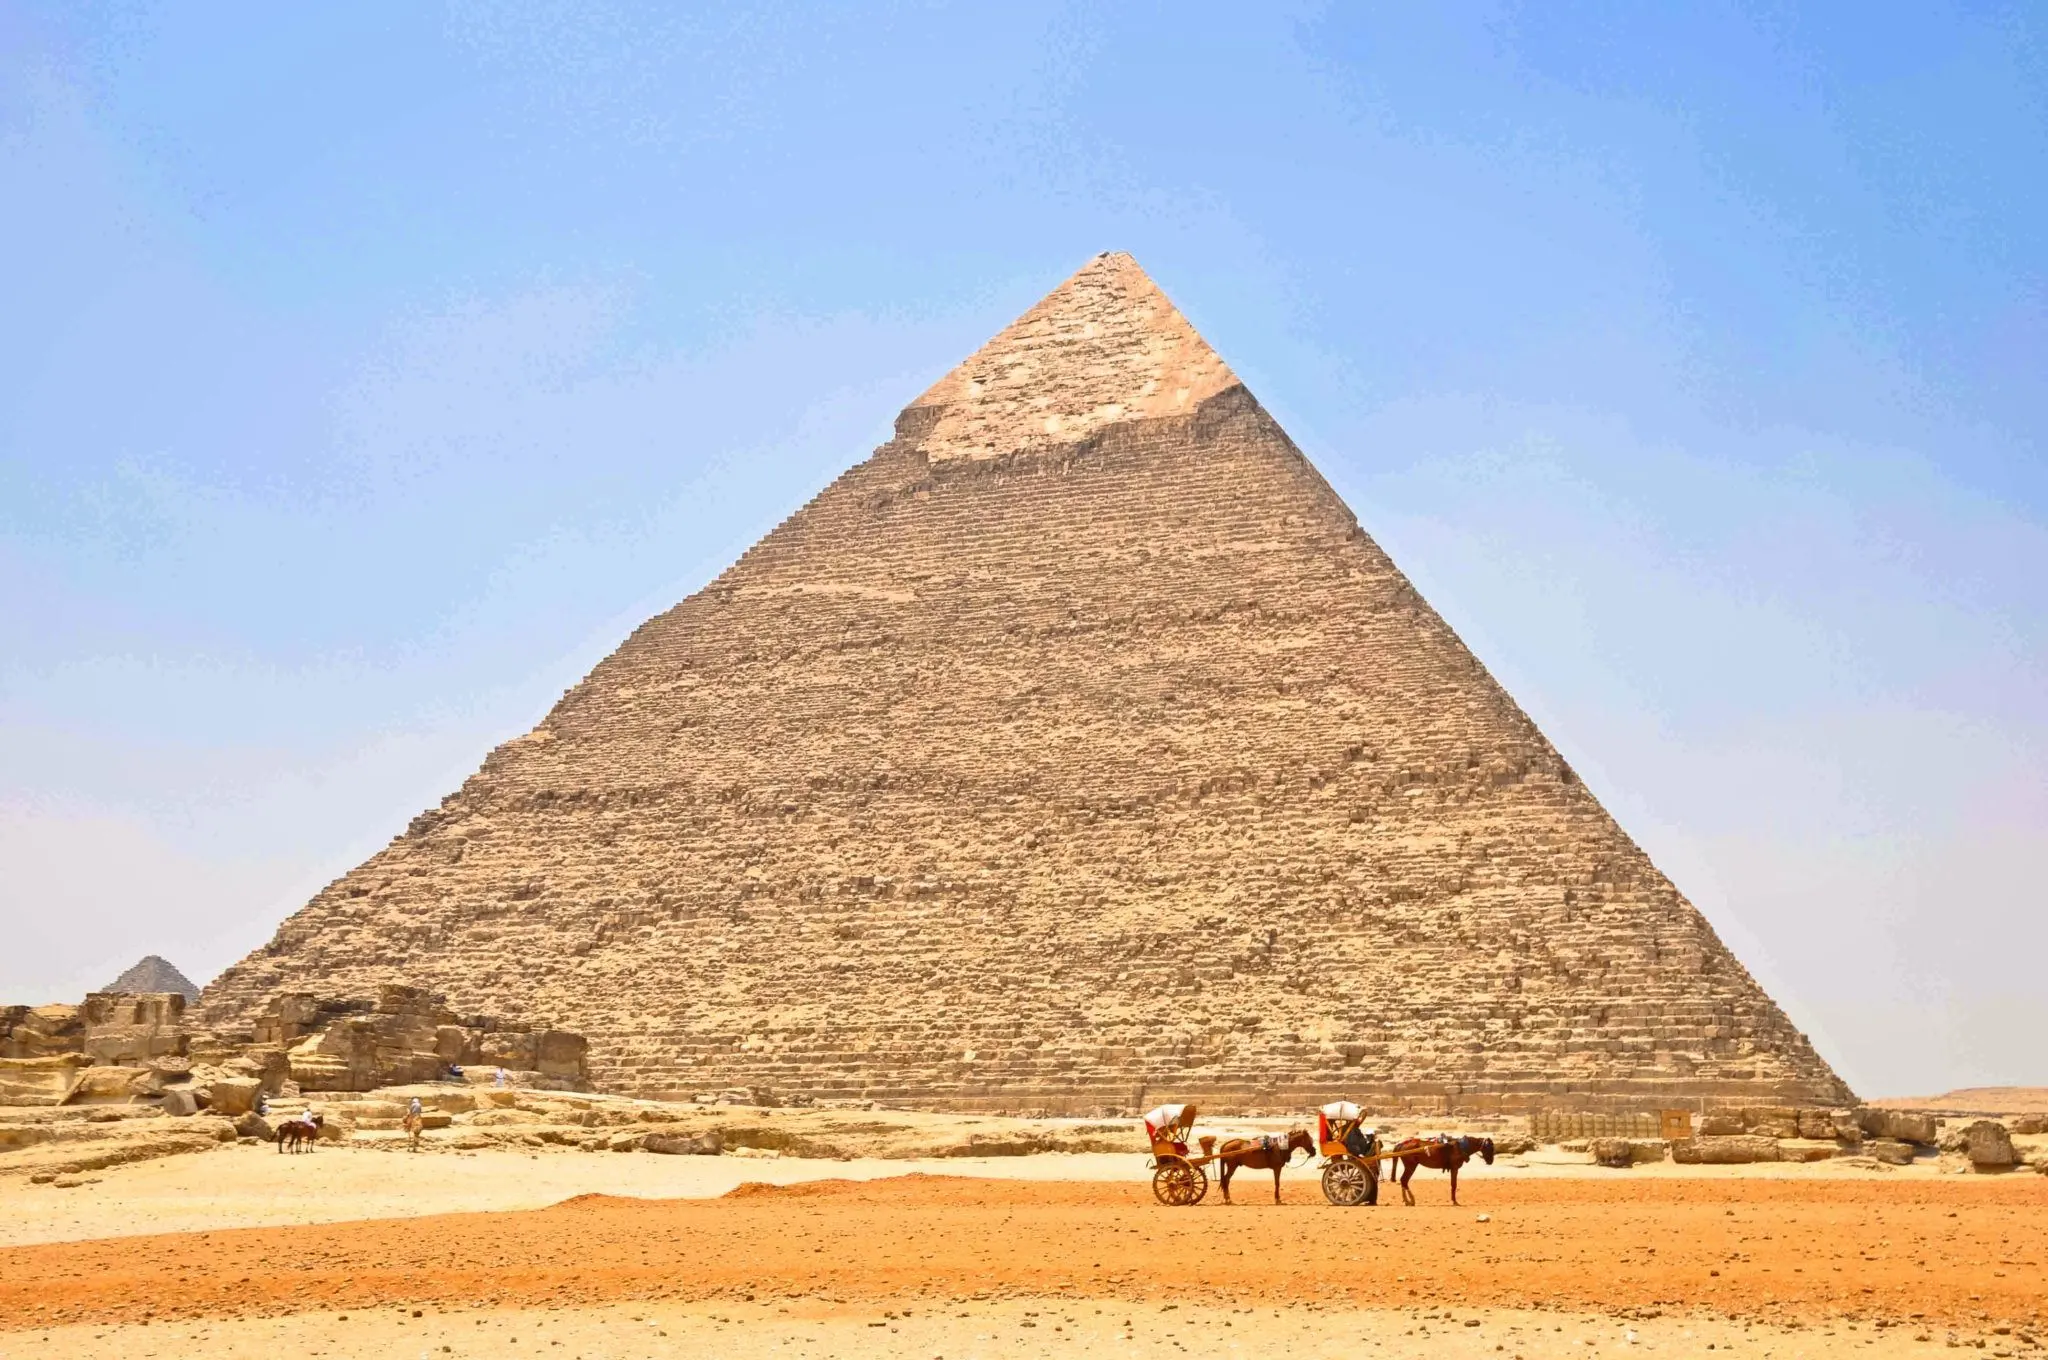 The Great Pyramid of Giza is just one of the amazing things to see in Egypt